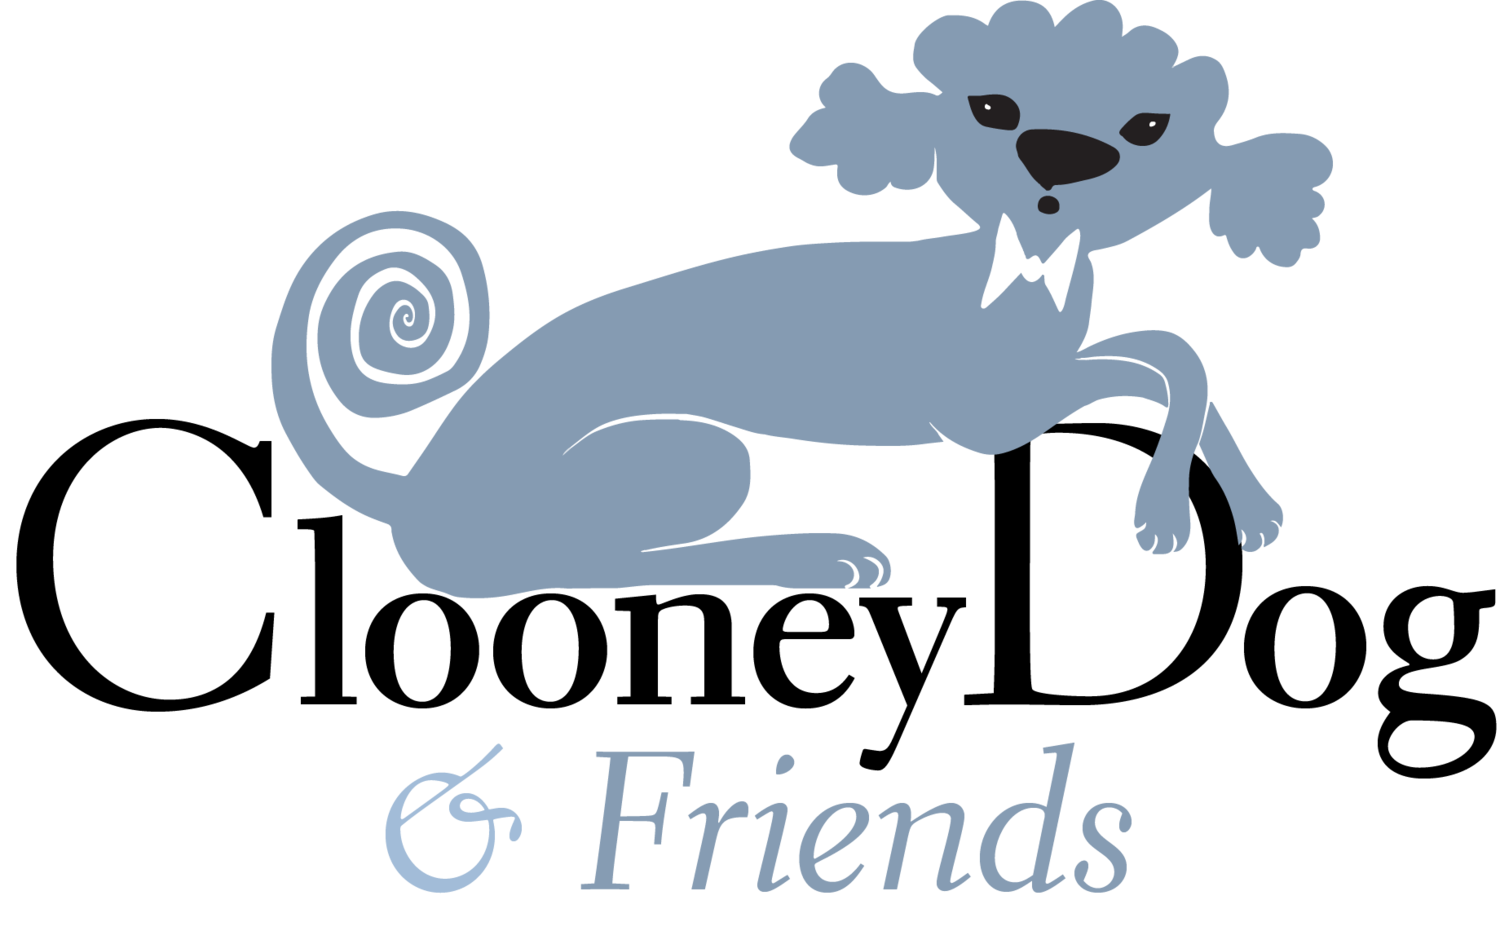 Kindness clipart summer friend. Poodles herd sheep and